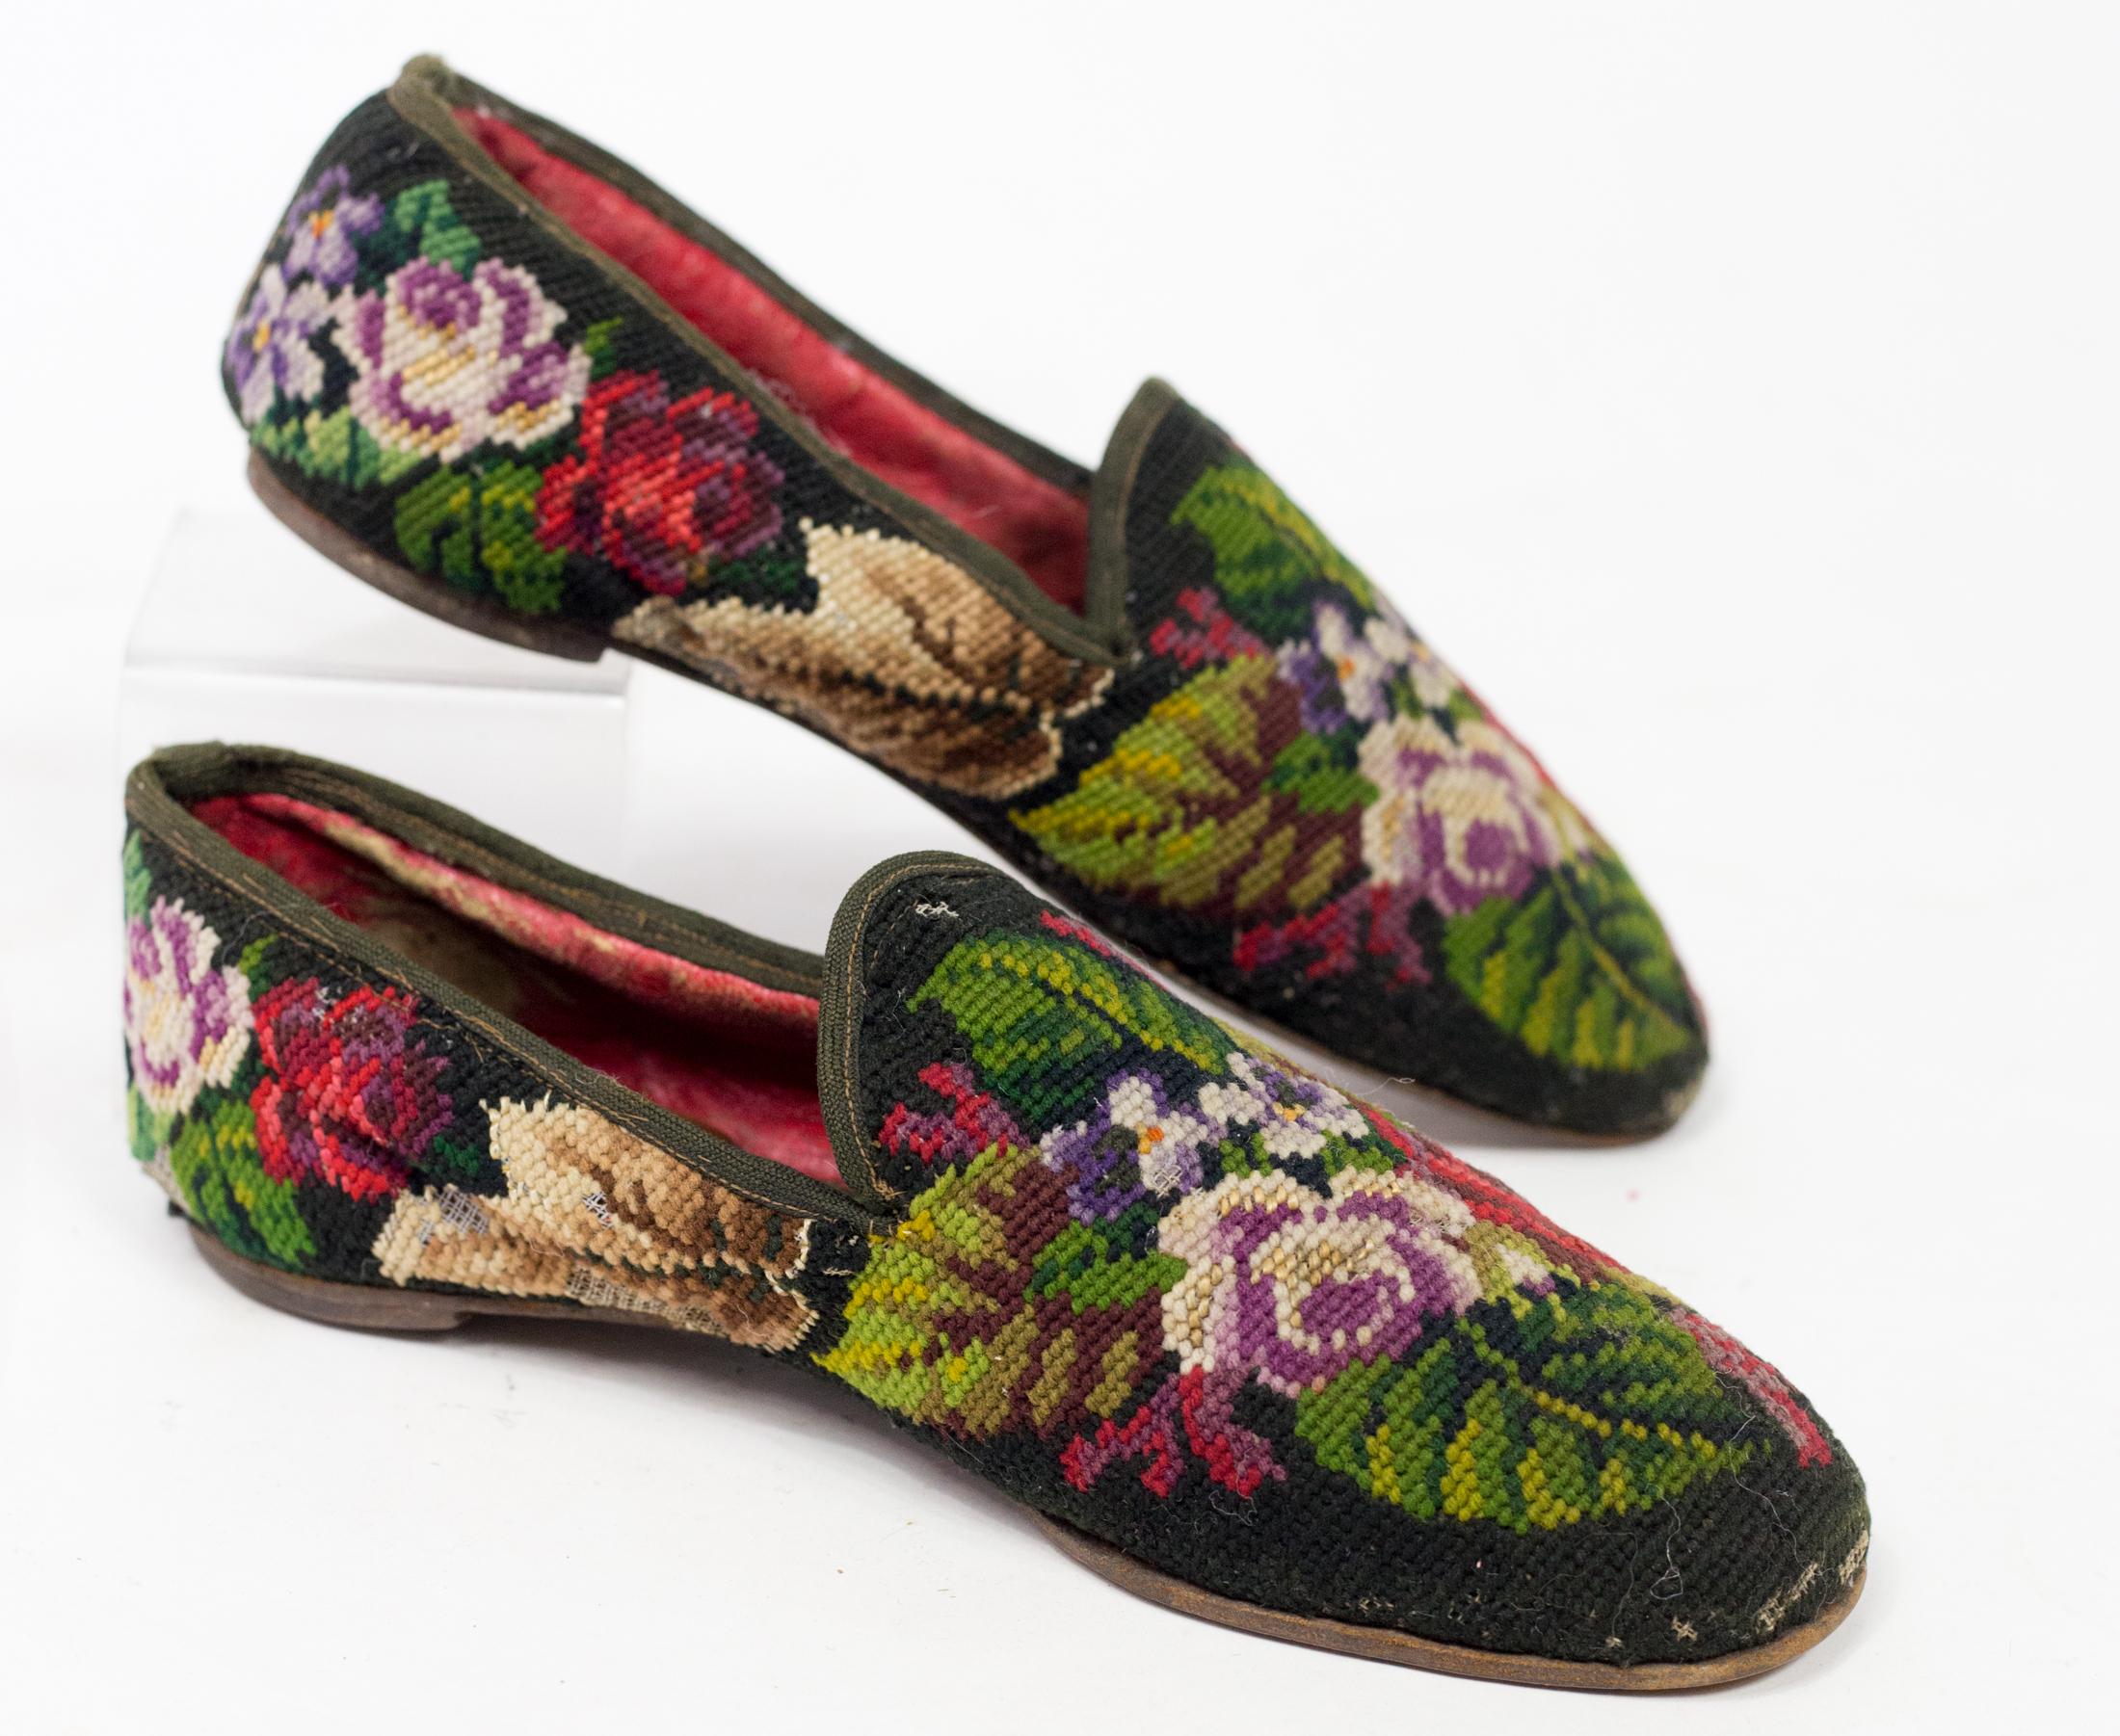 Pair of men's slippers in stitch point tapestry - France Circa 1860 3